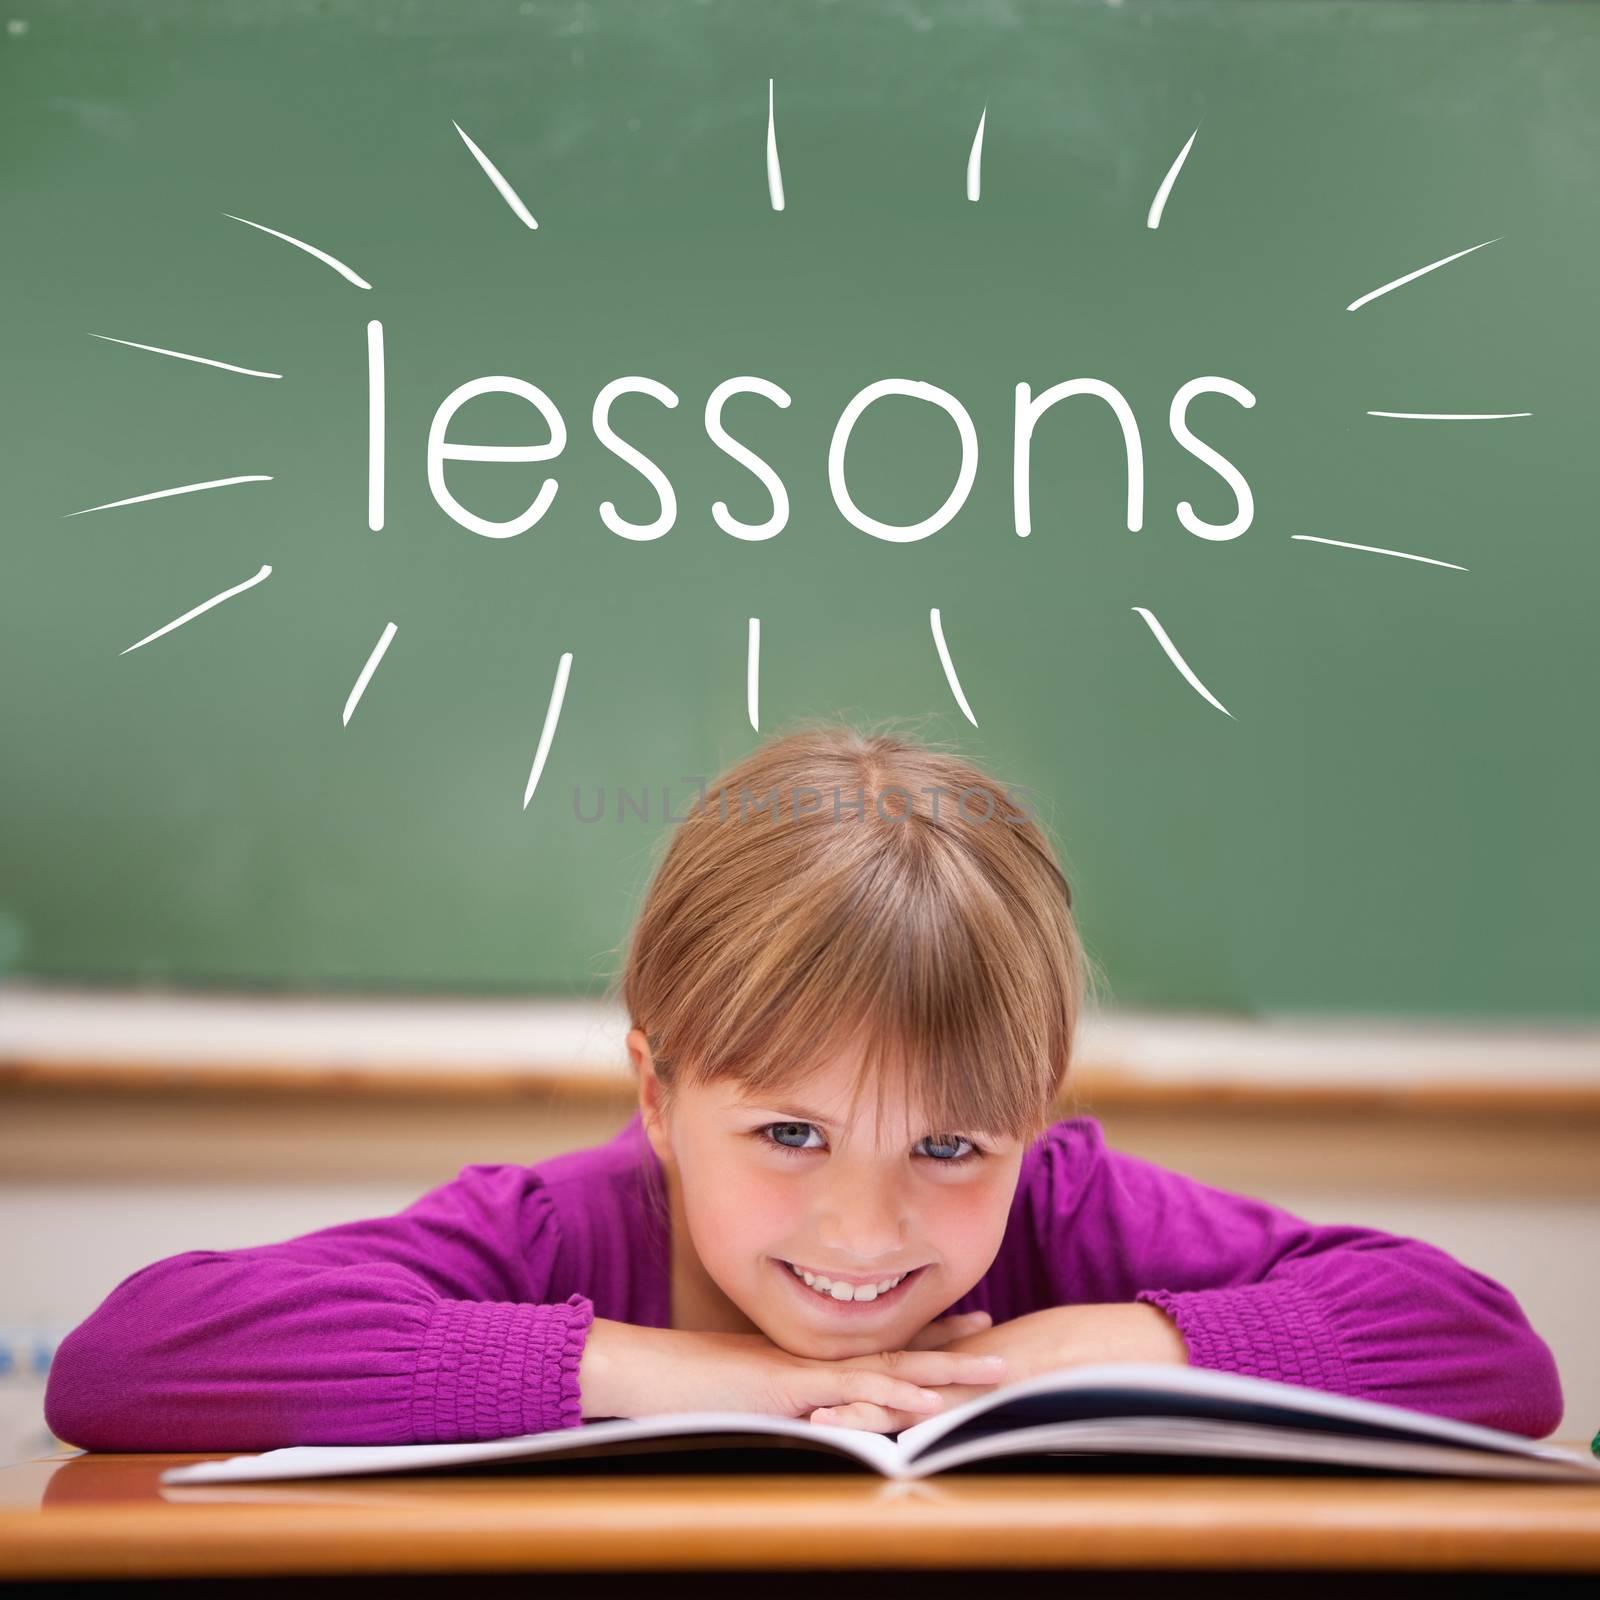 The word lessons against cute pupil sitting at desk